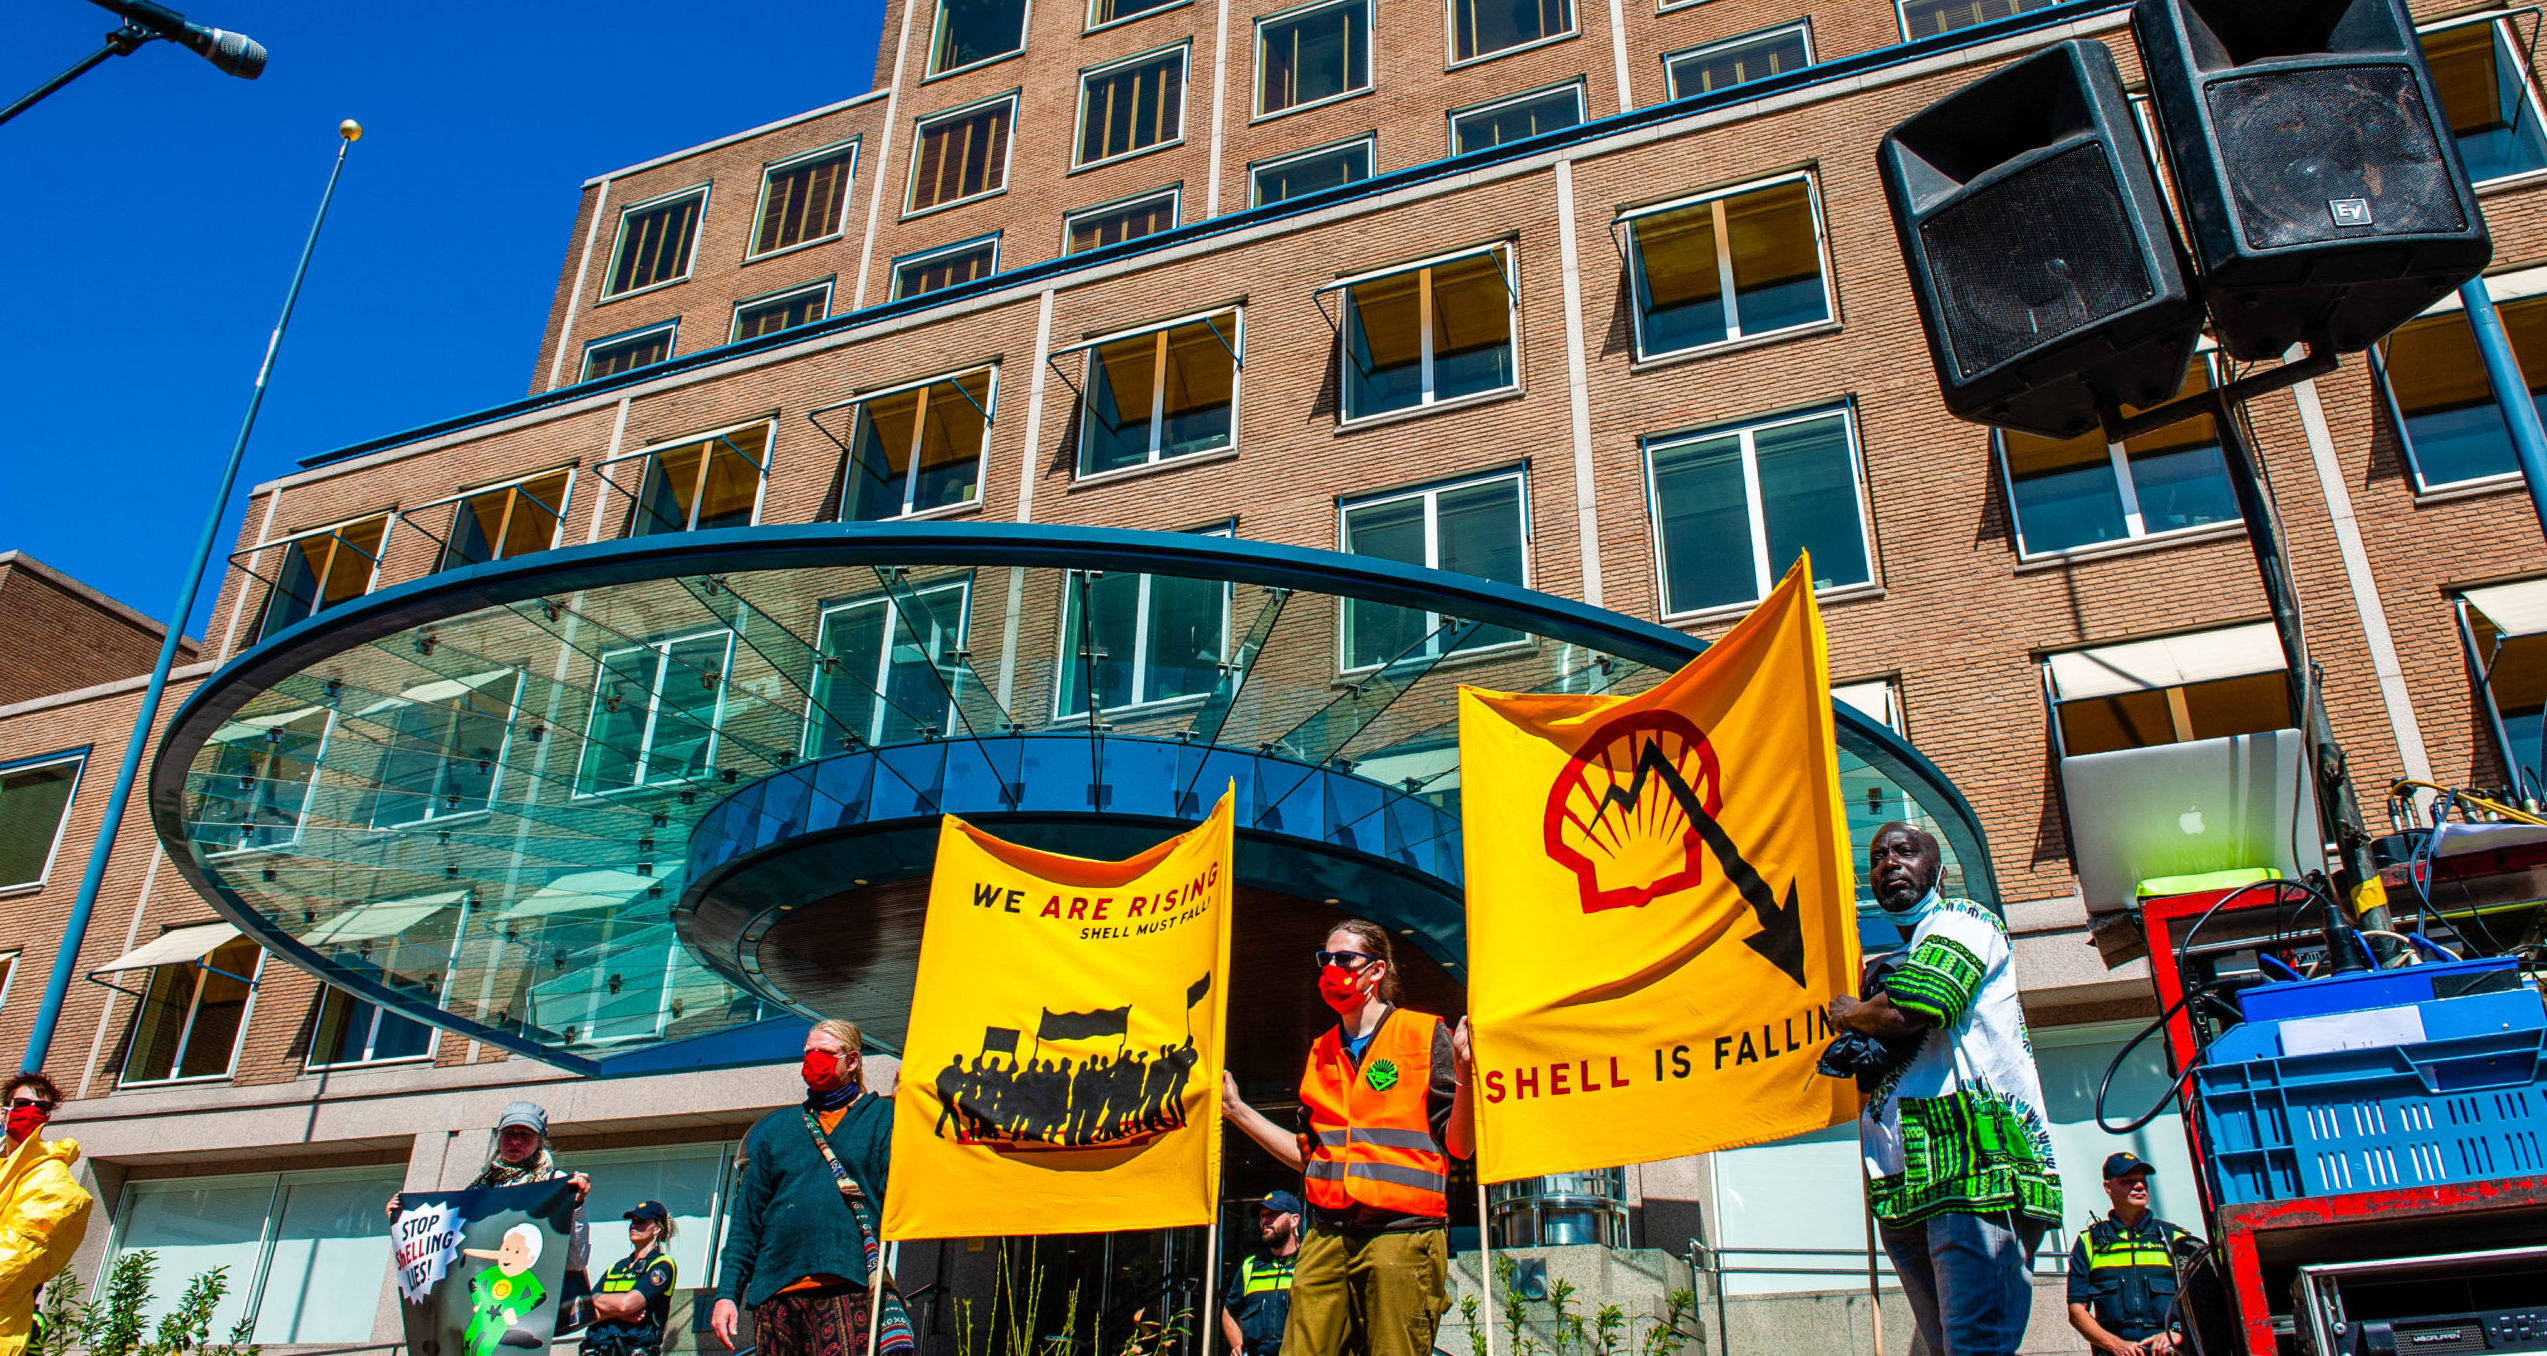 Climate activists score ‘victory defeat’ at Shell’s GA